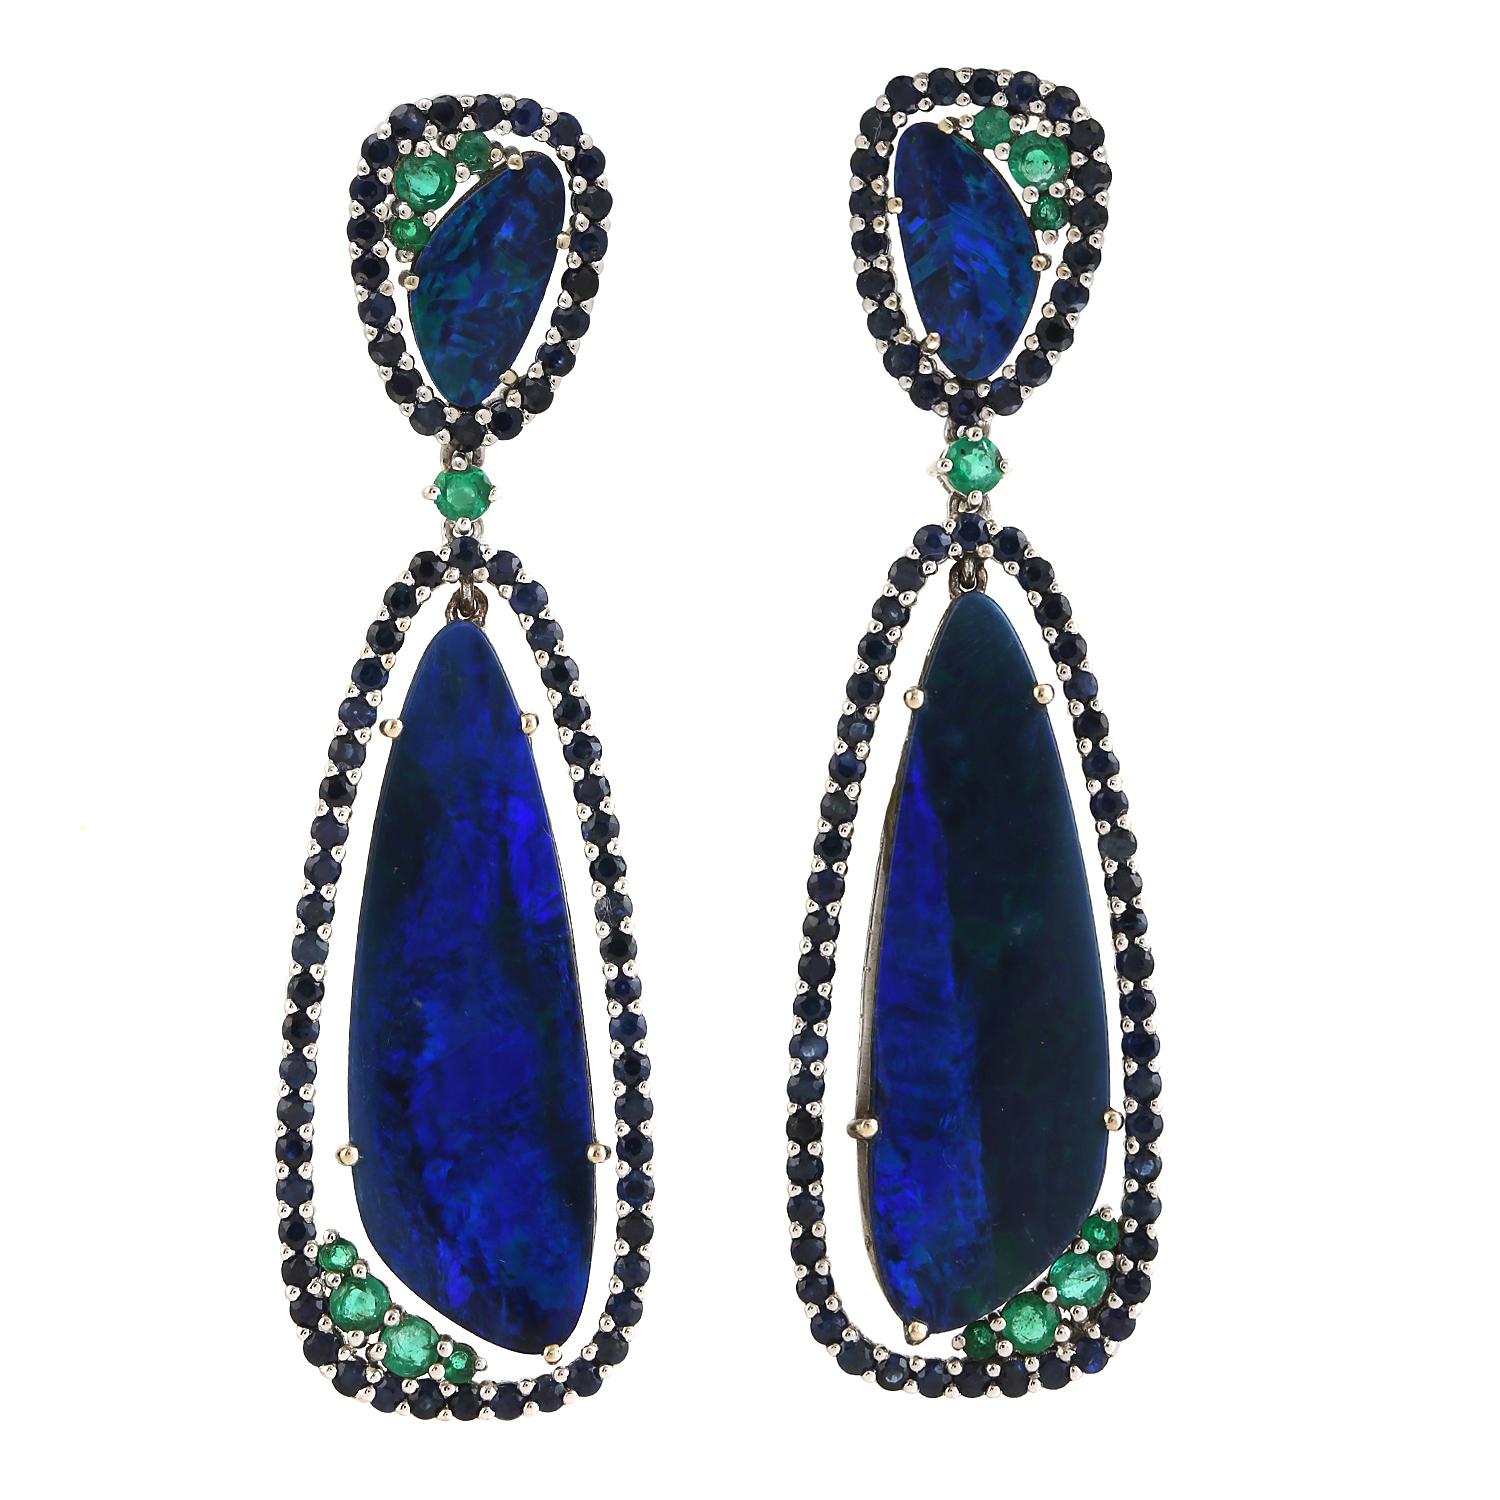 Mixed Cut Dual Tone Doublet Opal Dangle Earrings With Sapphire & Emerald In 18k White Gold